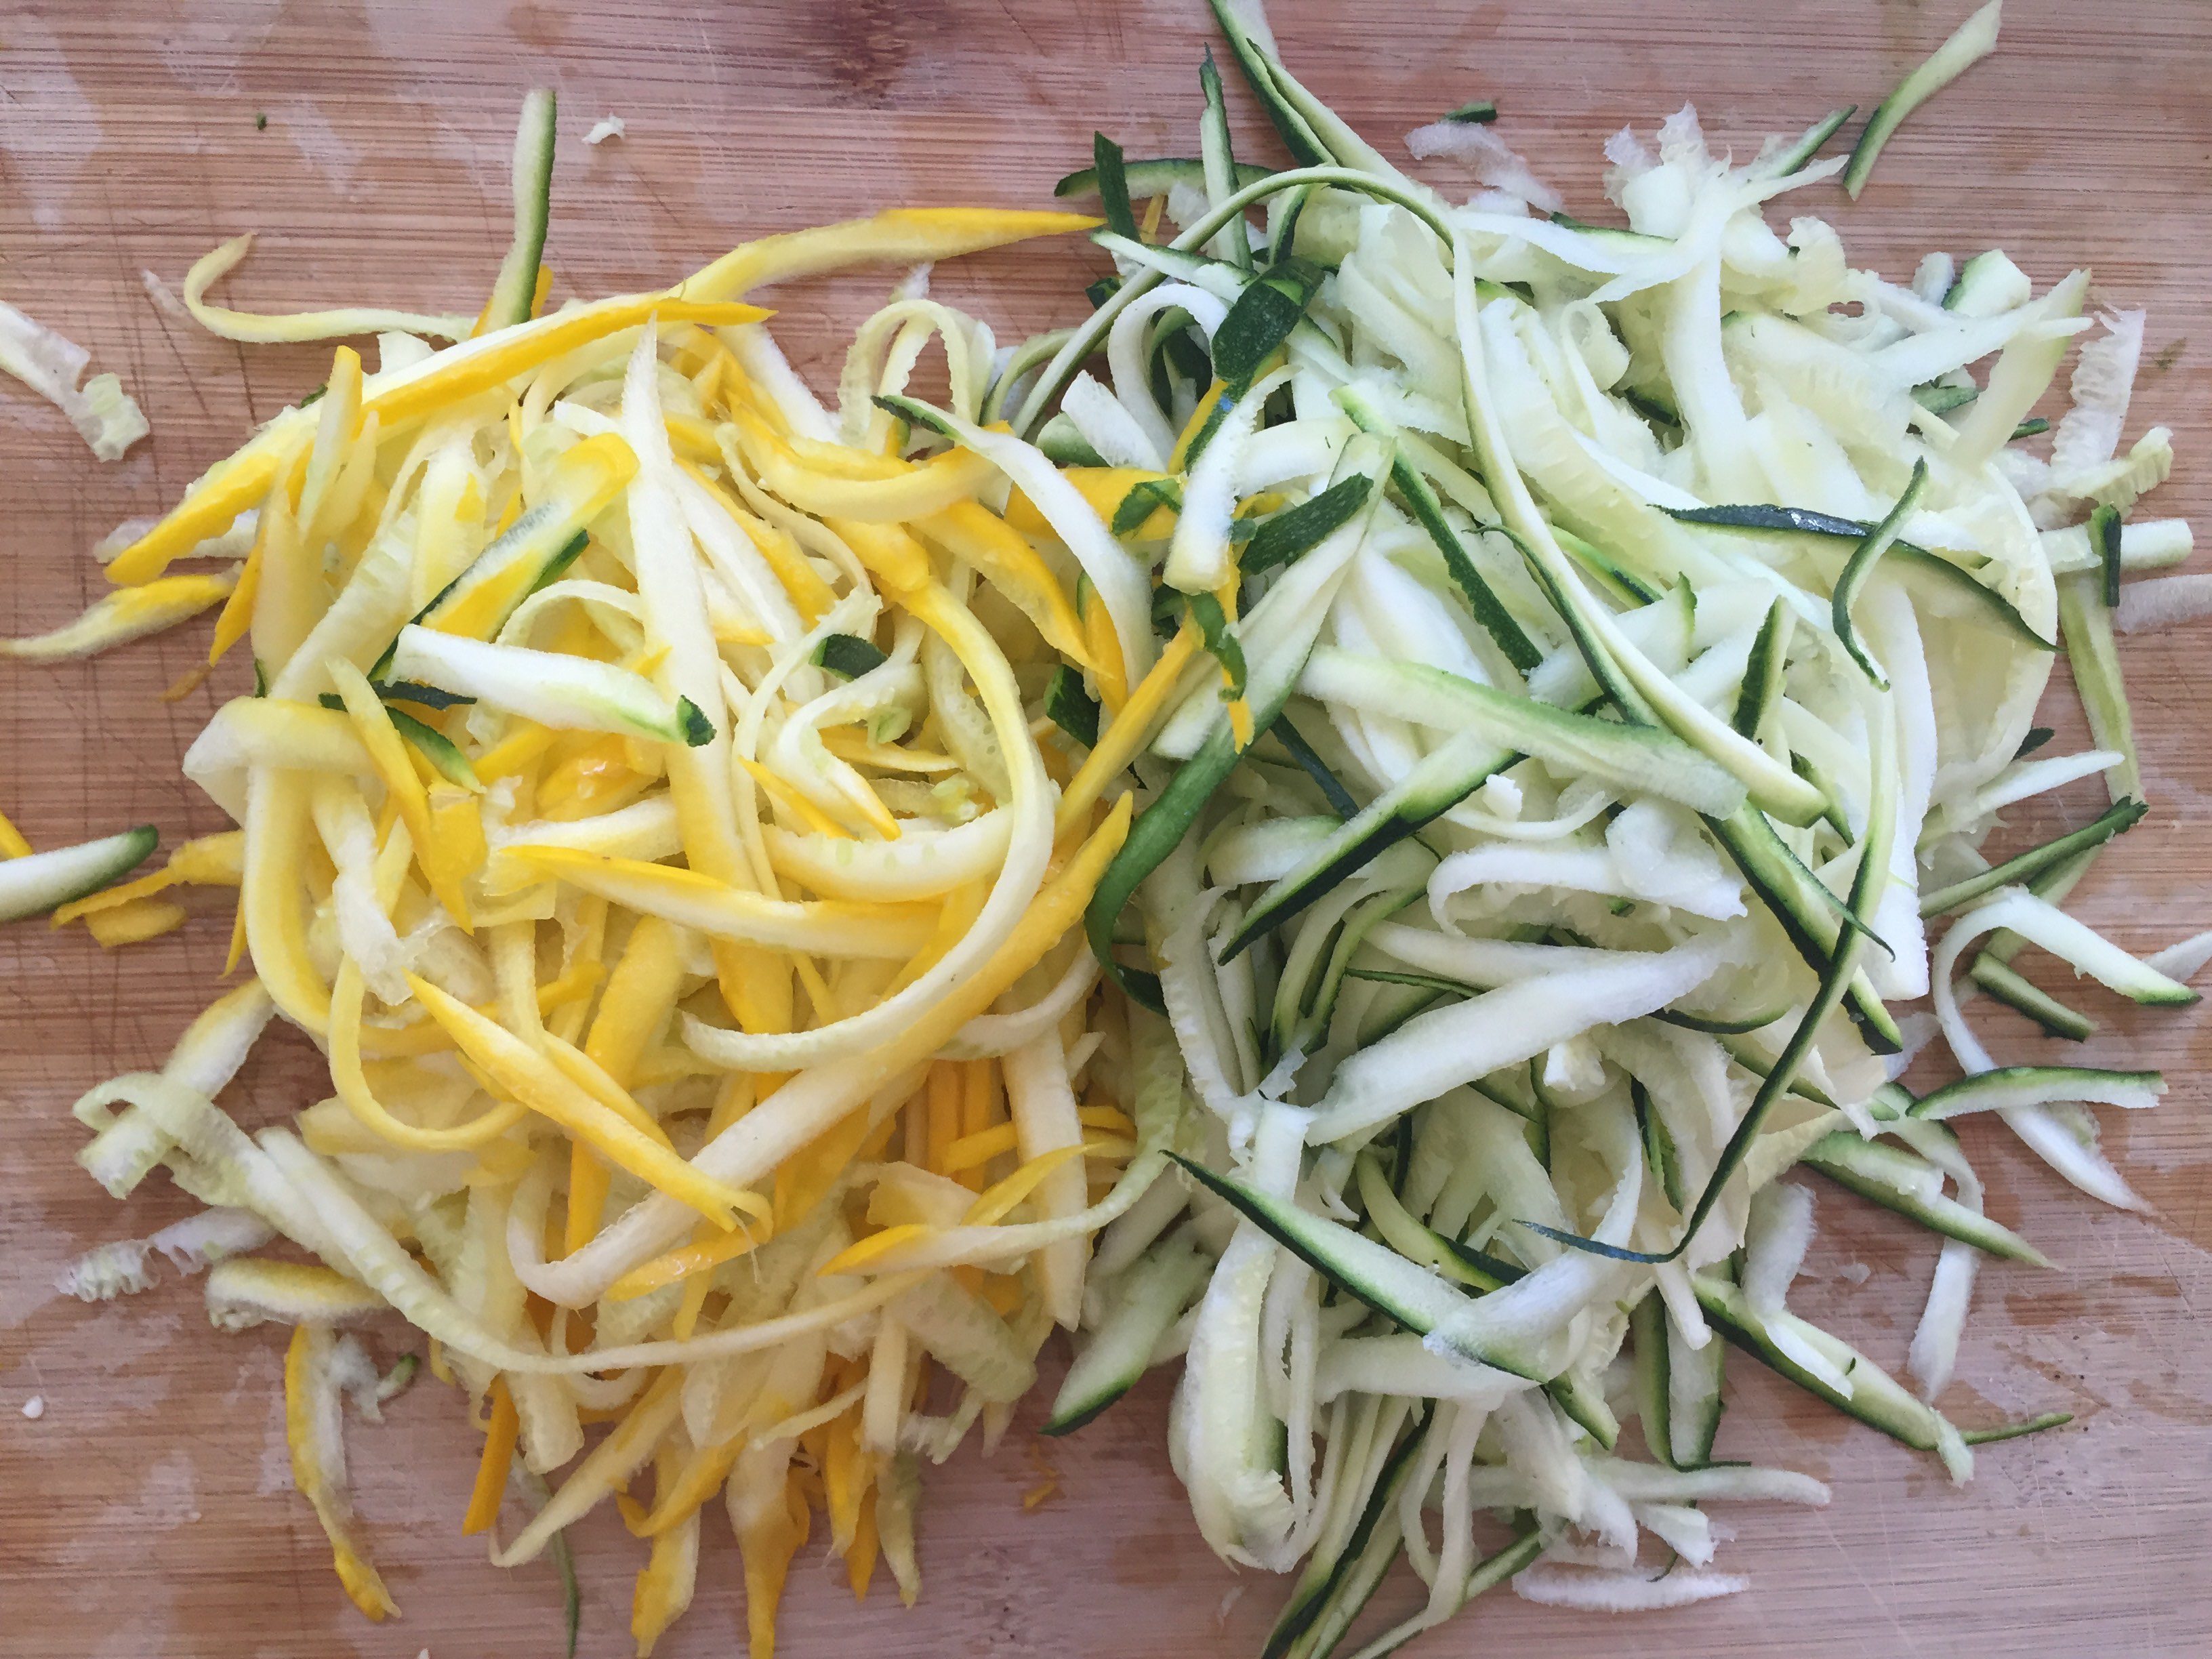 How to Make Zucchini Noodles With—or Without—a Spiralizer